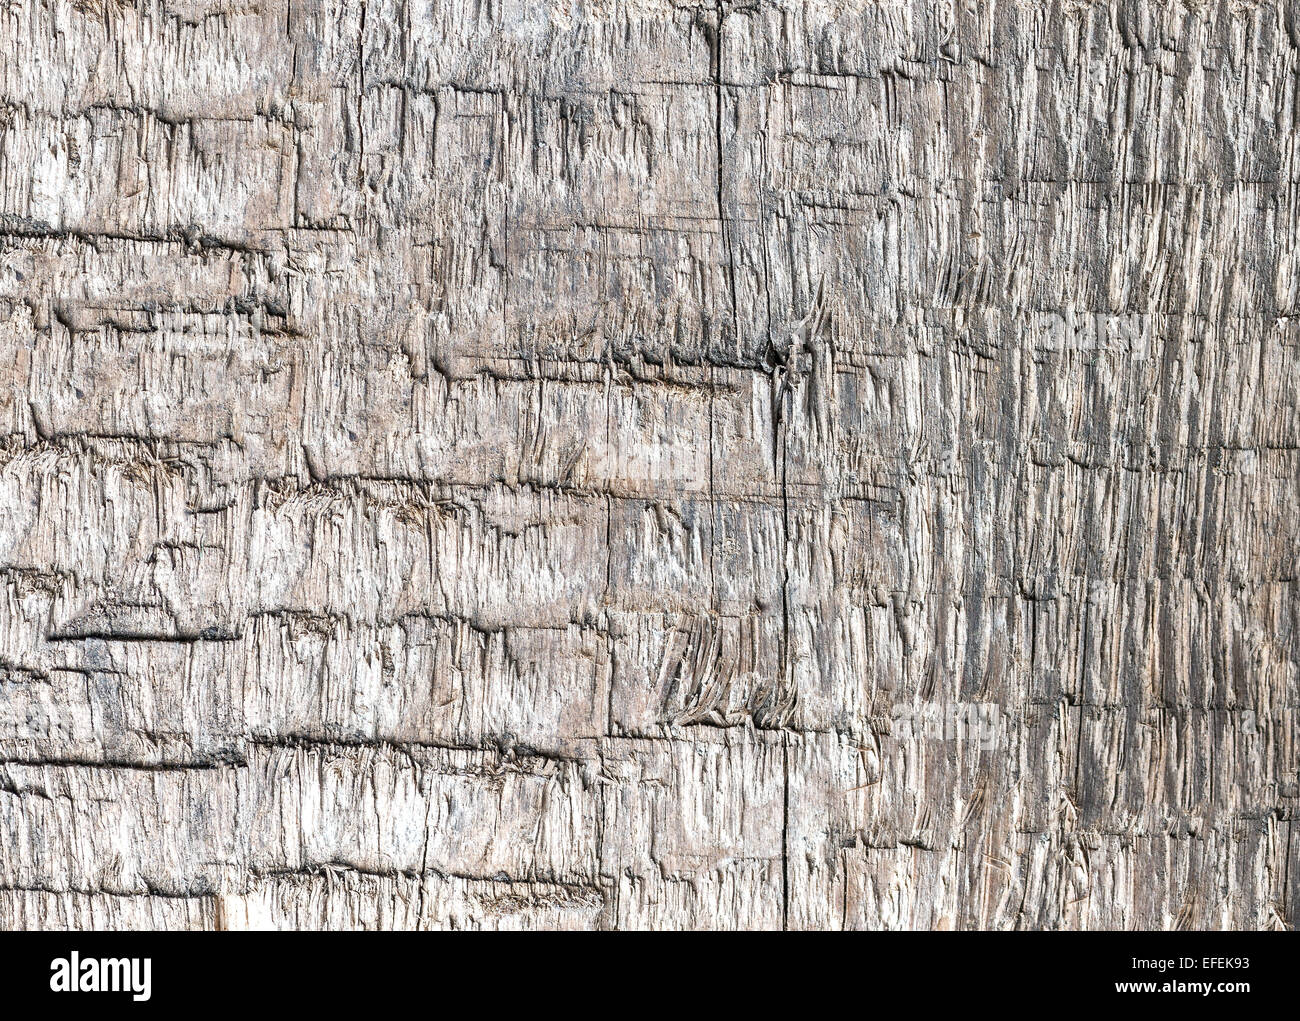 Old weathered rough wood background or texture. Stock Photo